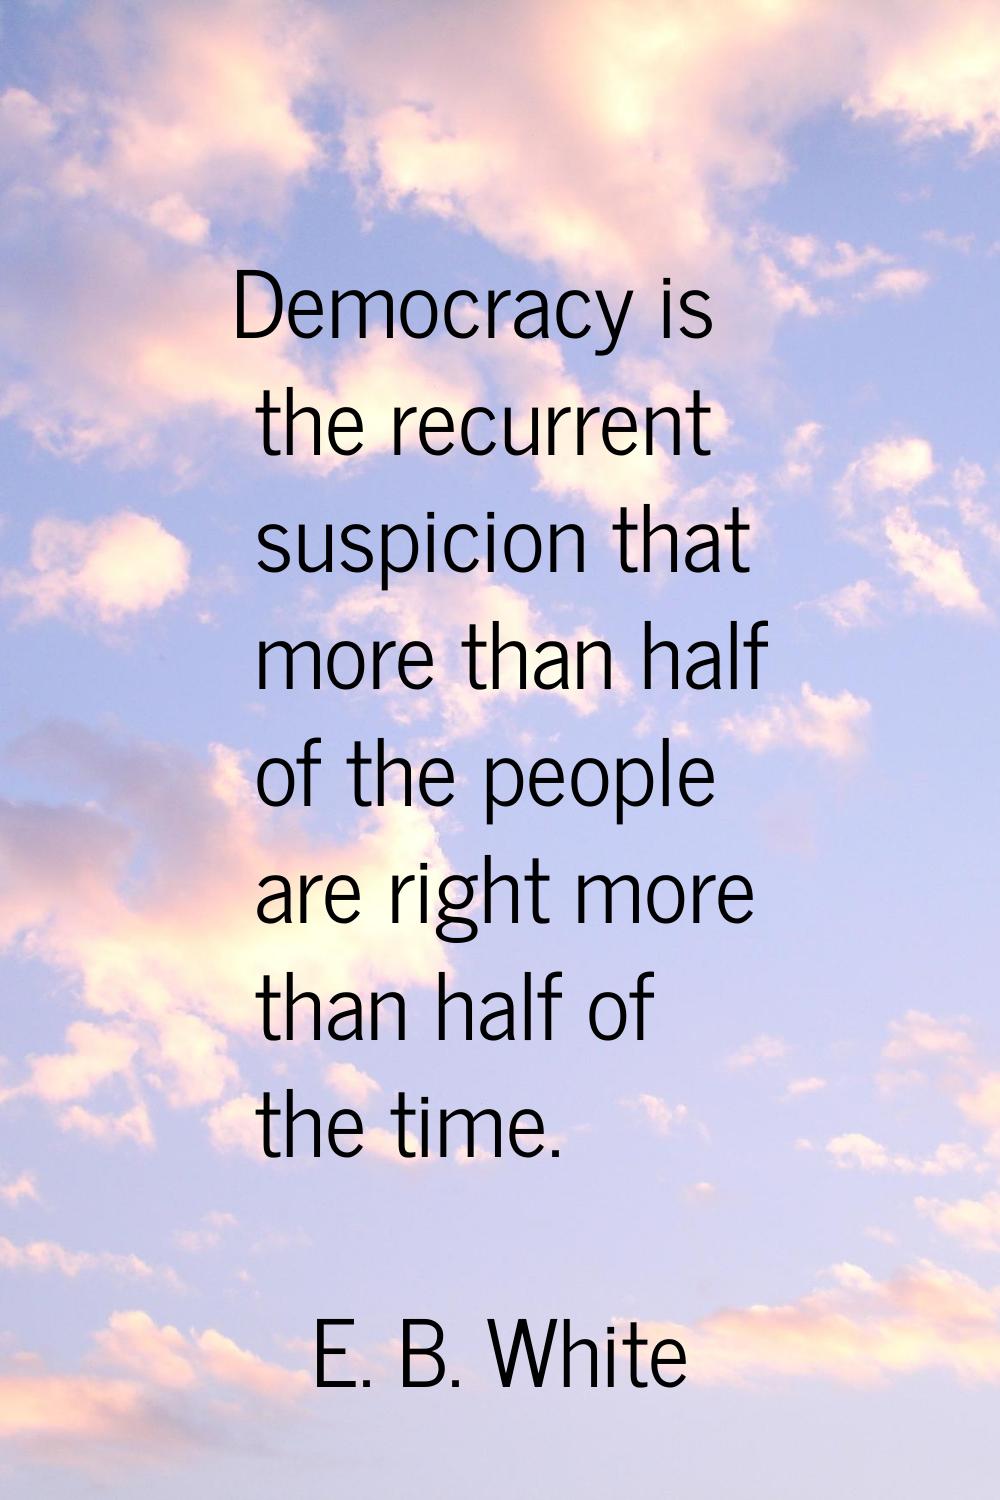 Democracy is the recurrent suspicion that more than half of the people are right more than half of 